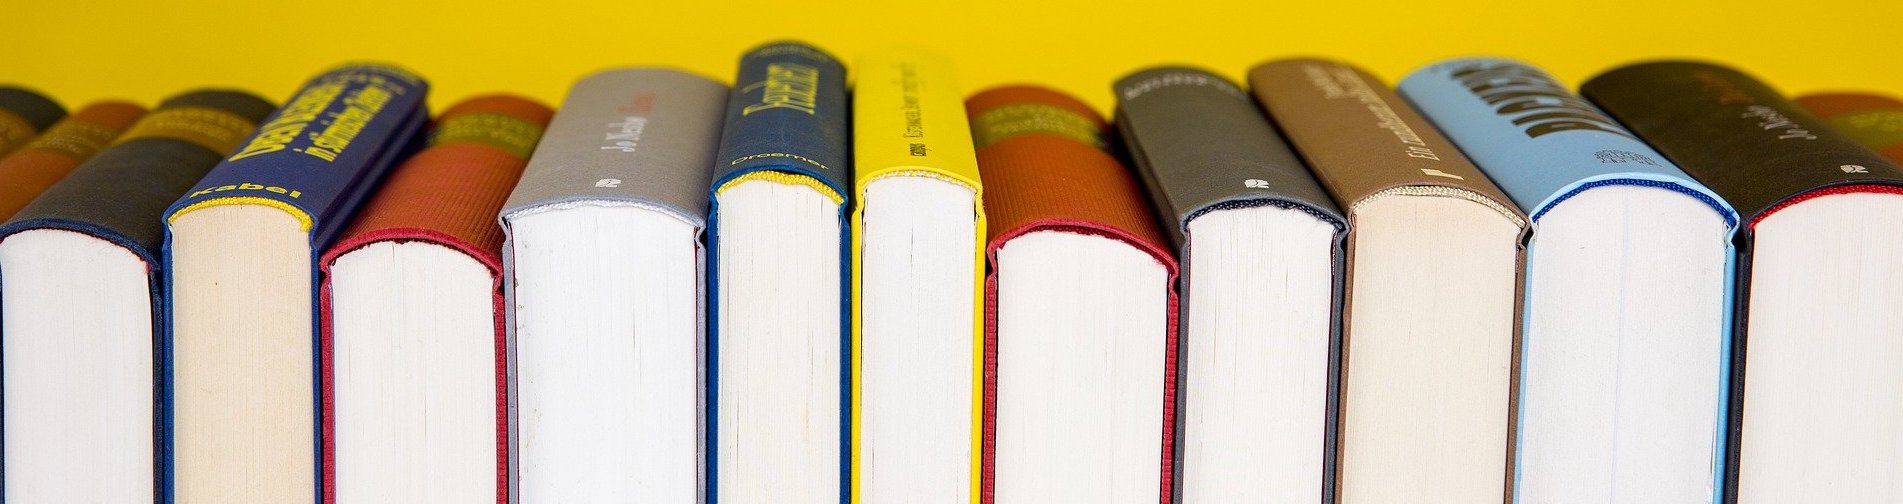 Row of books on yellow background